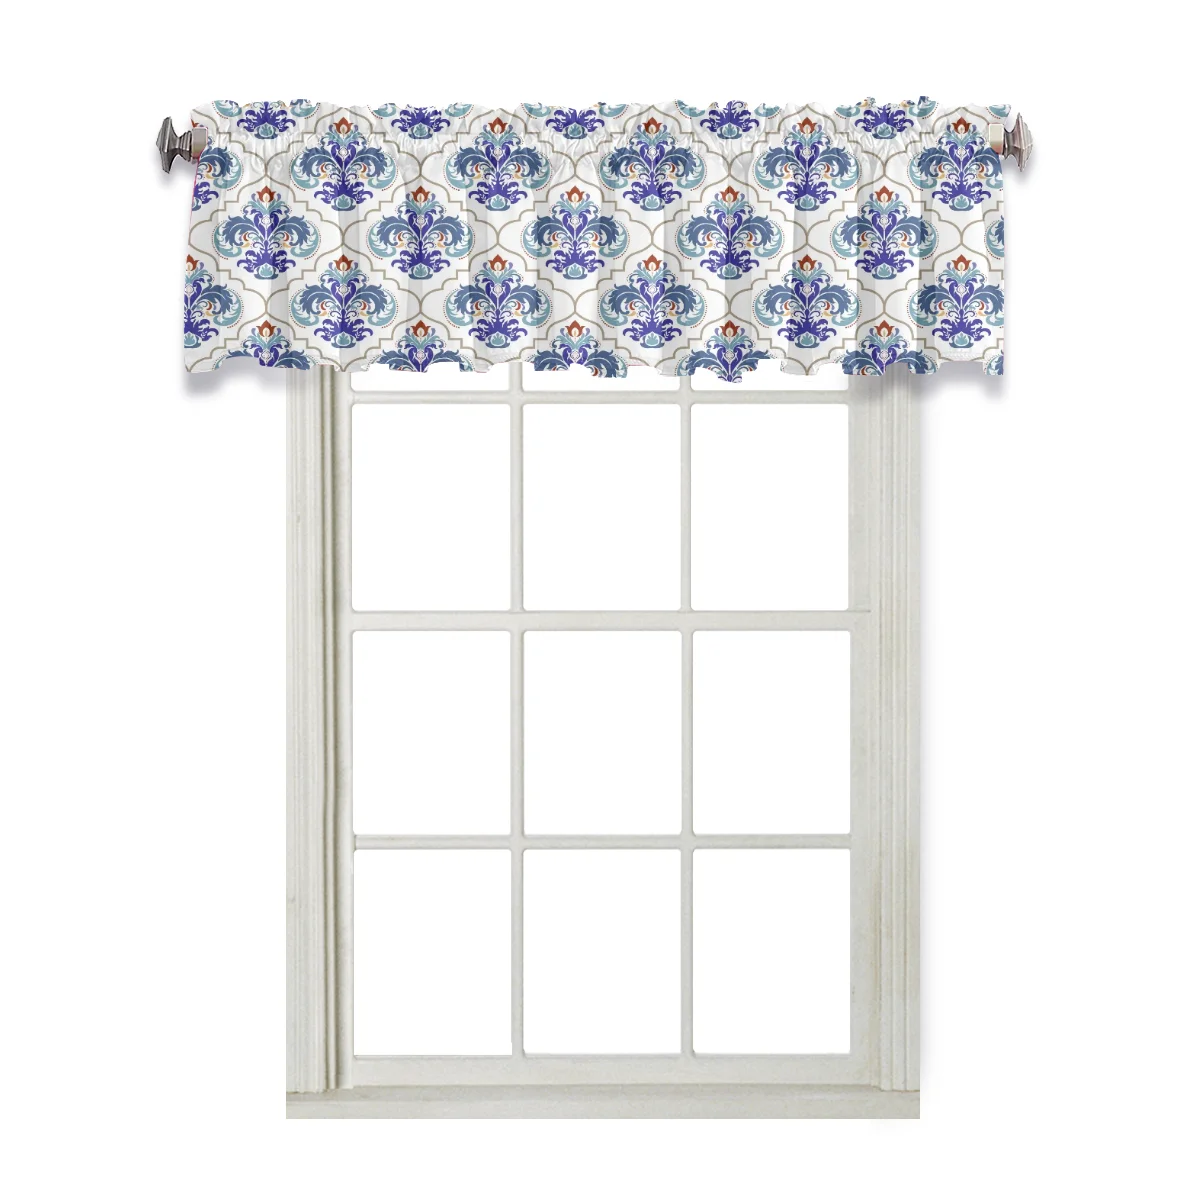 Best Selling Geometric Art Valance Blackout Curtains Attached Valance Factory Wholesale Modern Valance Curtains